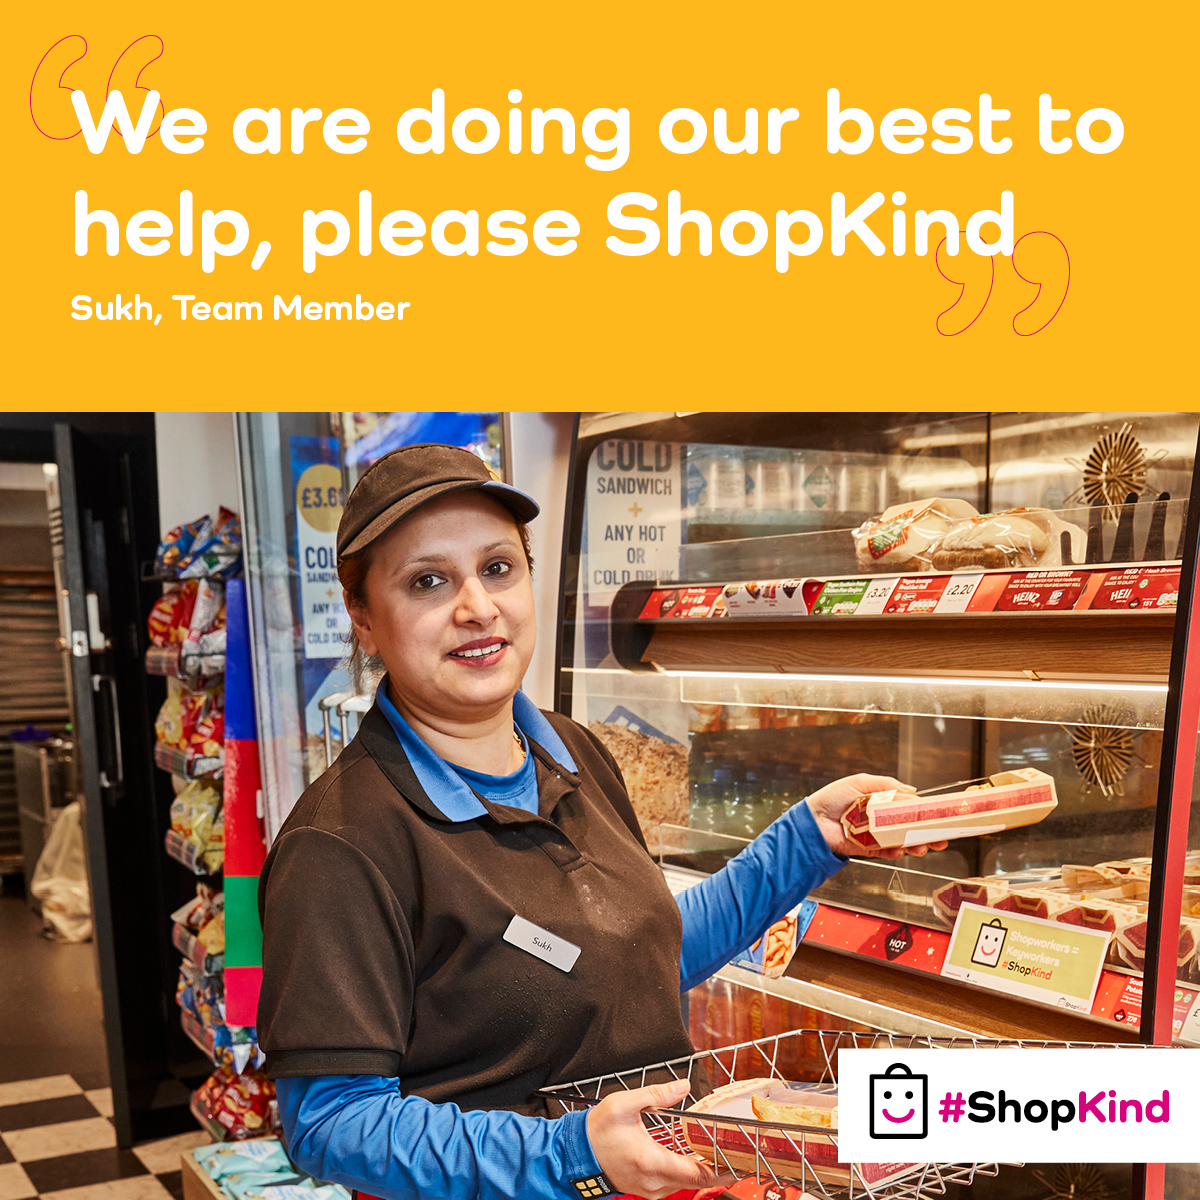 Have you heard about #ShopKind? 

ShopKind is backed by the Home Office and aims to:
•Encourage positive behaviours in shops
•Acknowledge the important role of shopworkers
•Highlight the scale and impact of violence and abuse against shopworkers

Remember to #ShopKind